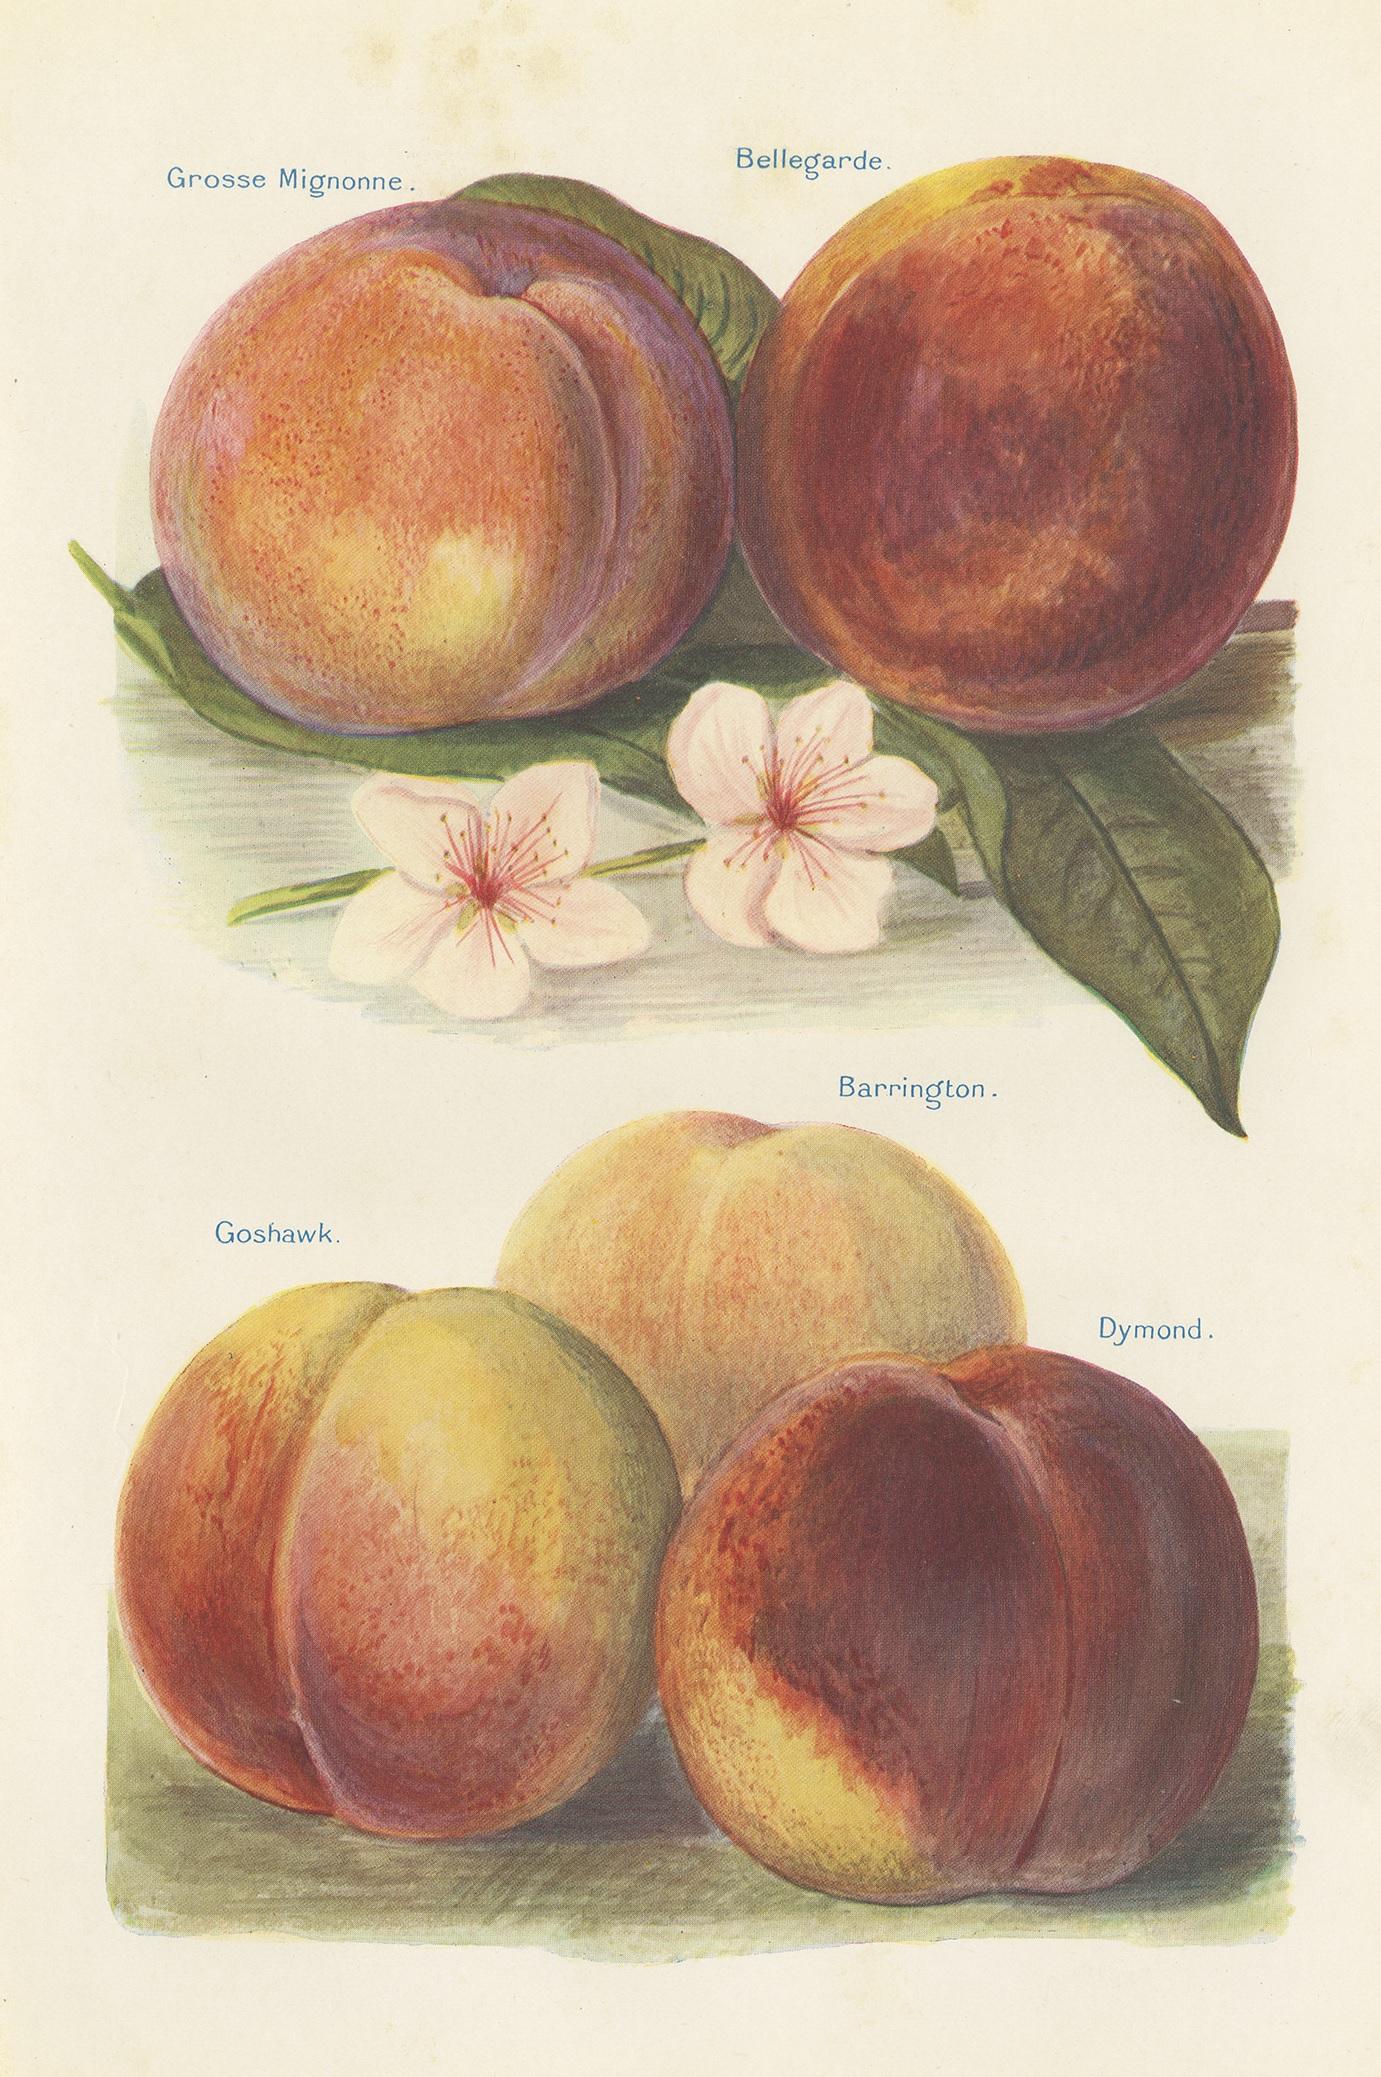 Paper Set of 2 Vintage Fruit Prints of Various Peaches by J. & H. Wright '1924'